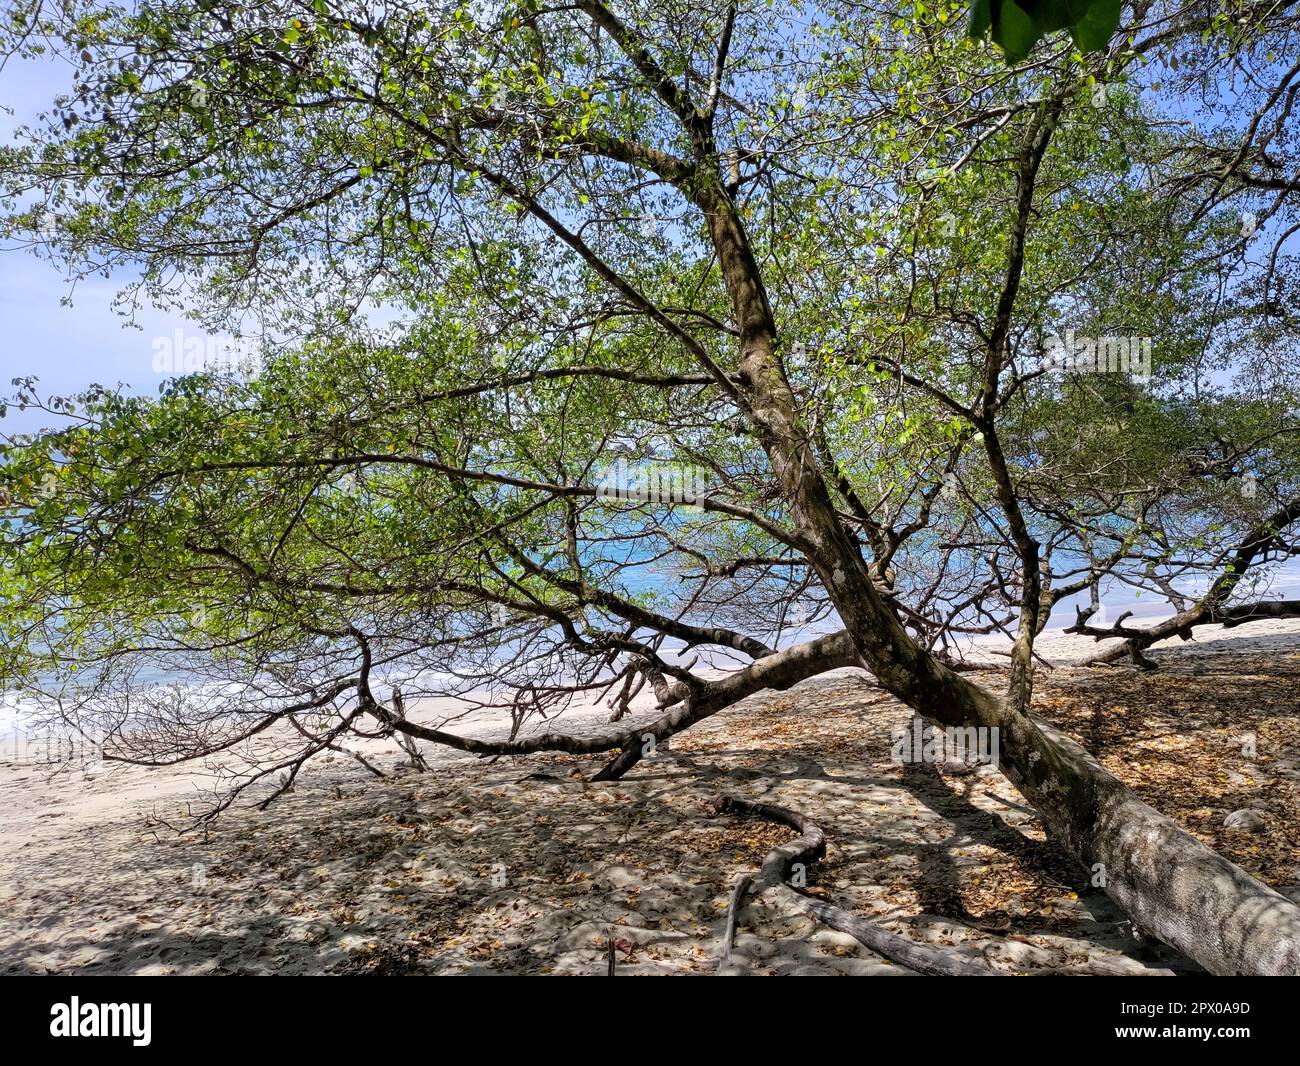 Manuel Antonio National Park, Costa Rica - A beach apple tree, or manchineel tree (Hippomane mancinella). All parts of the tree are toxic. It is somet Stock Photo